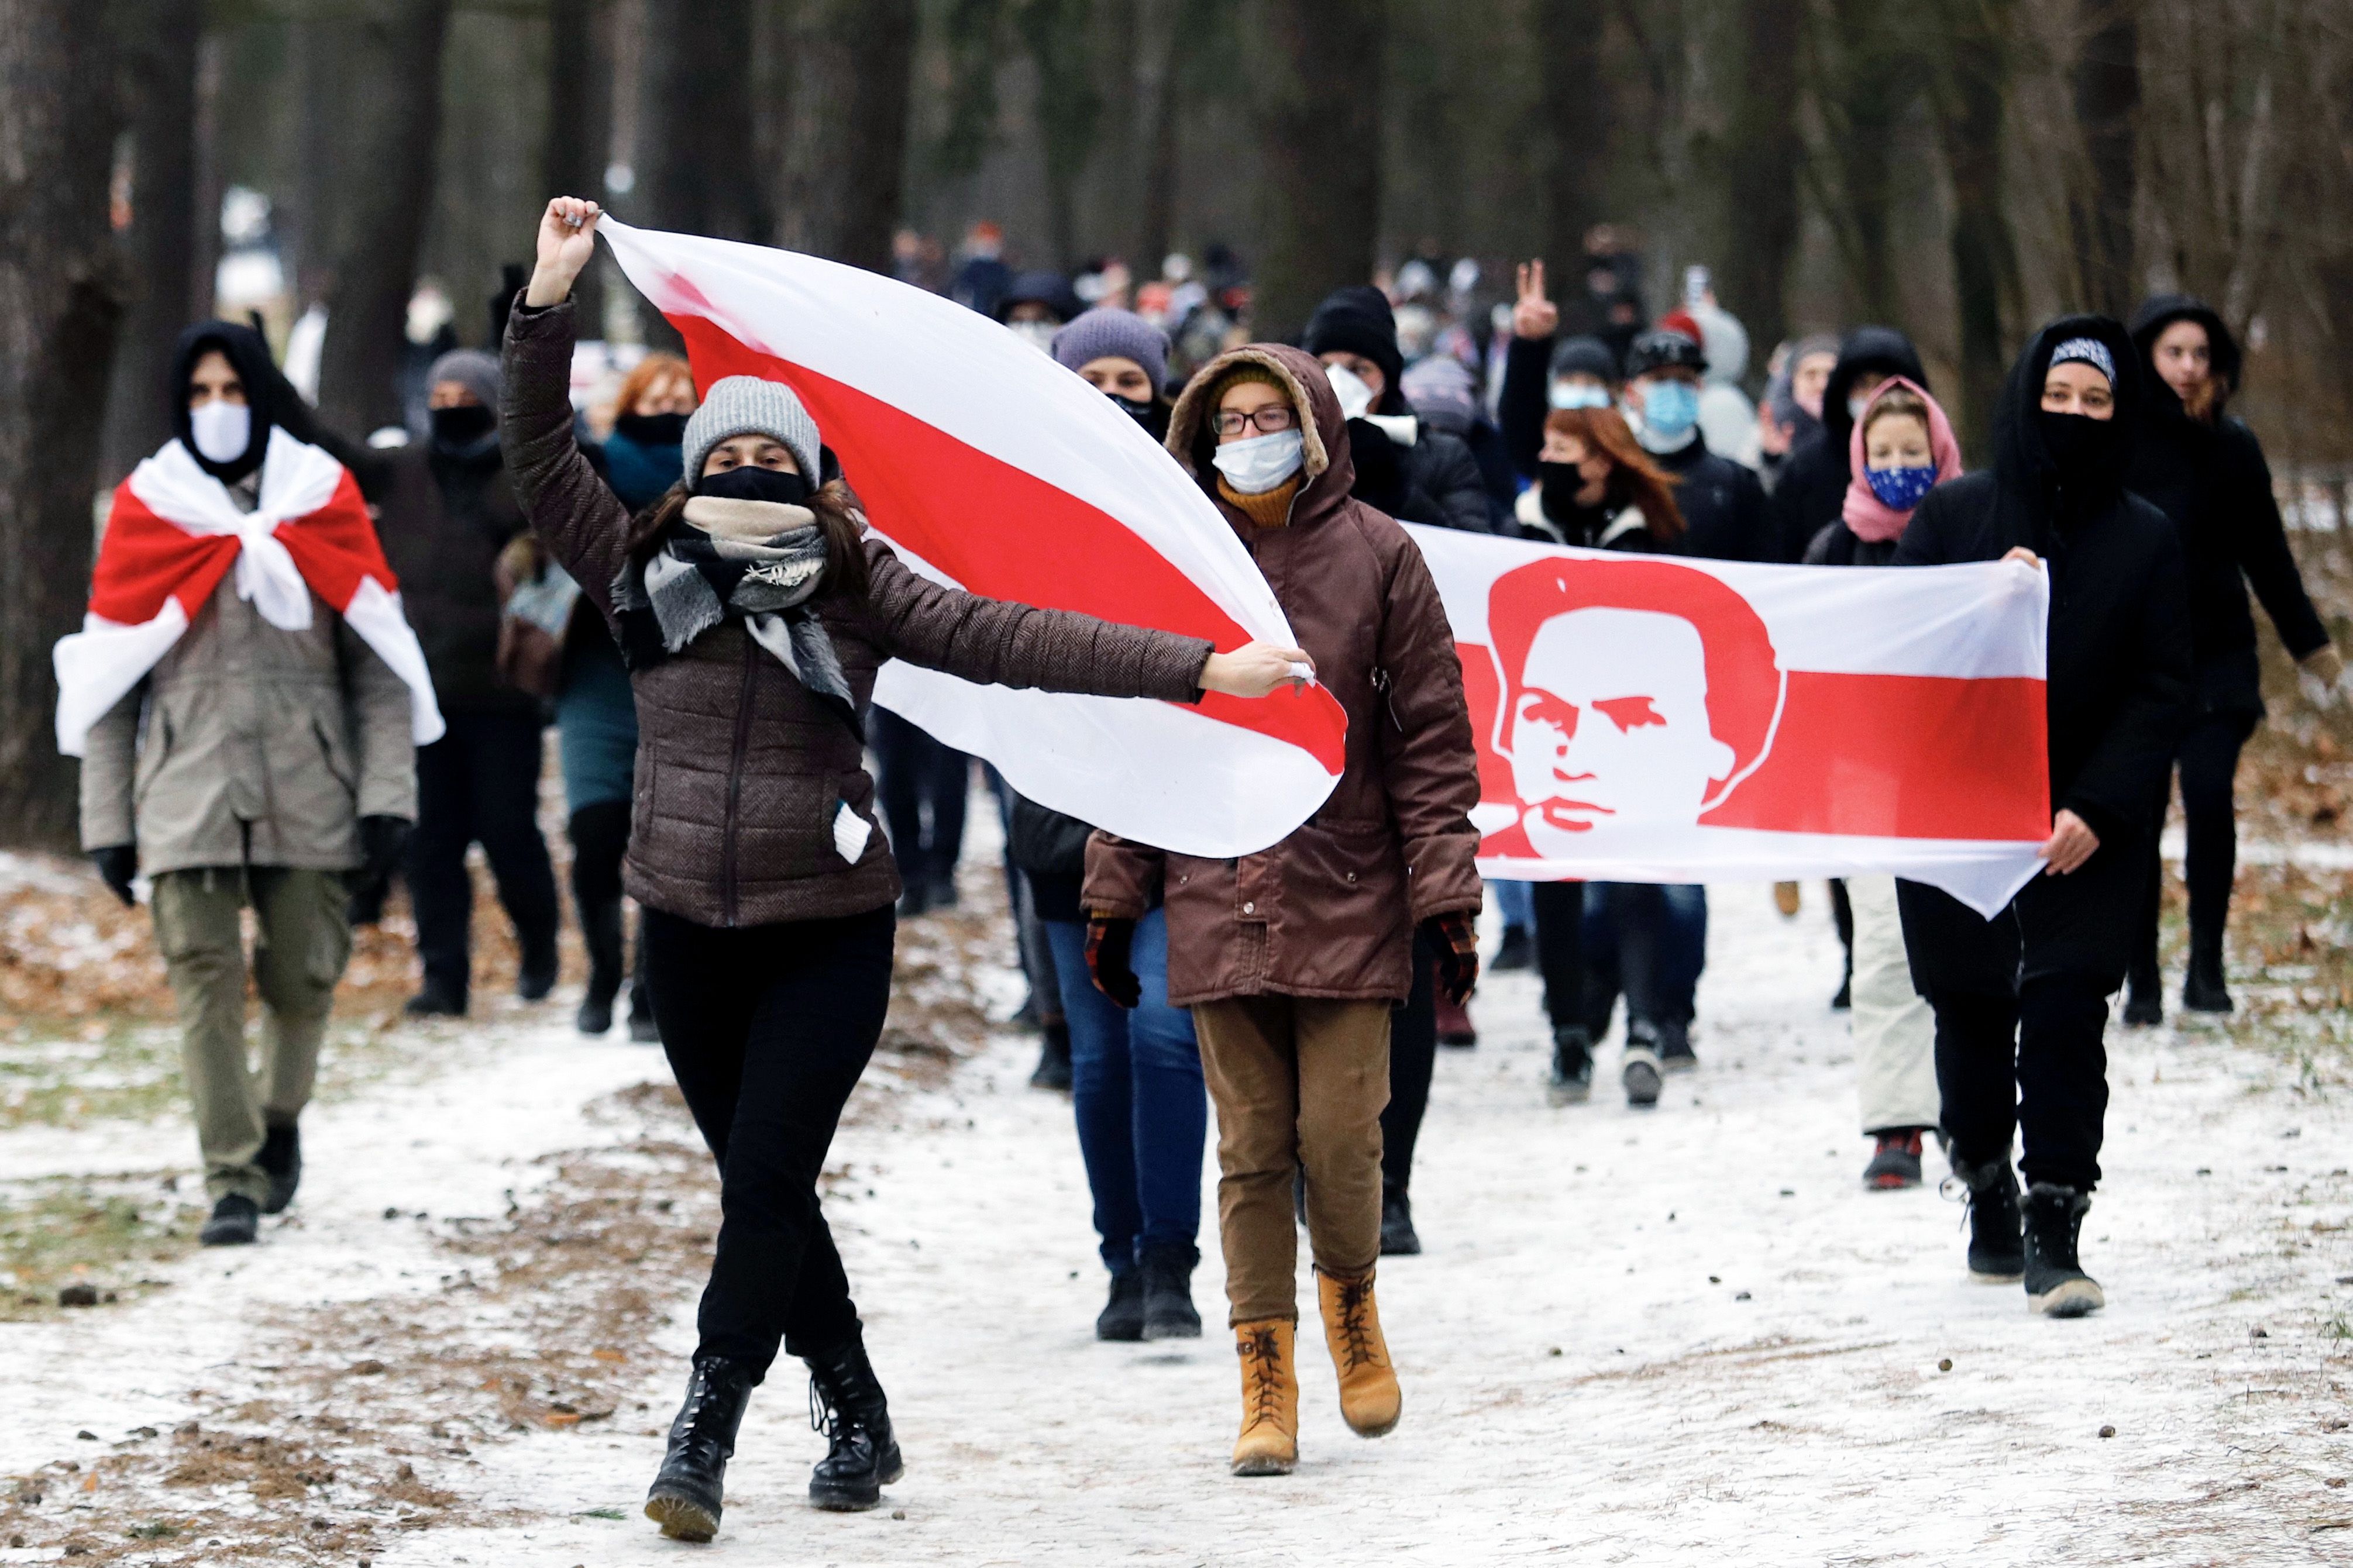 Baltic Assembly and Nordic Council stand by the people of Belarus.